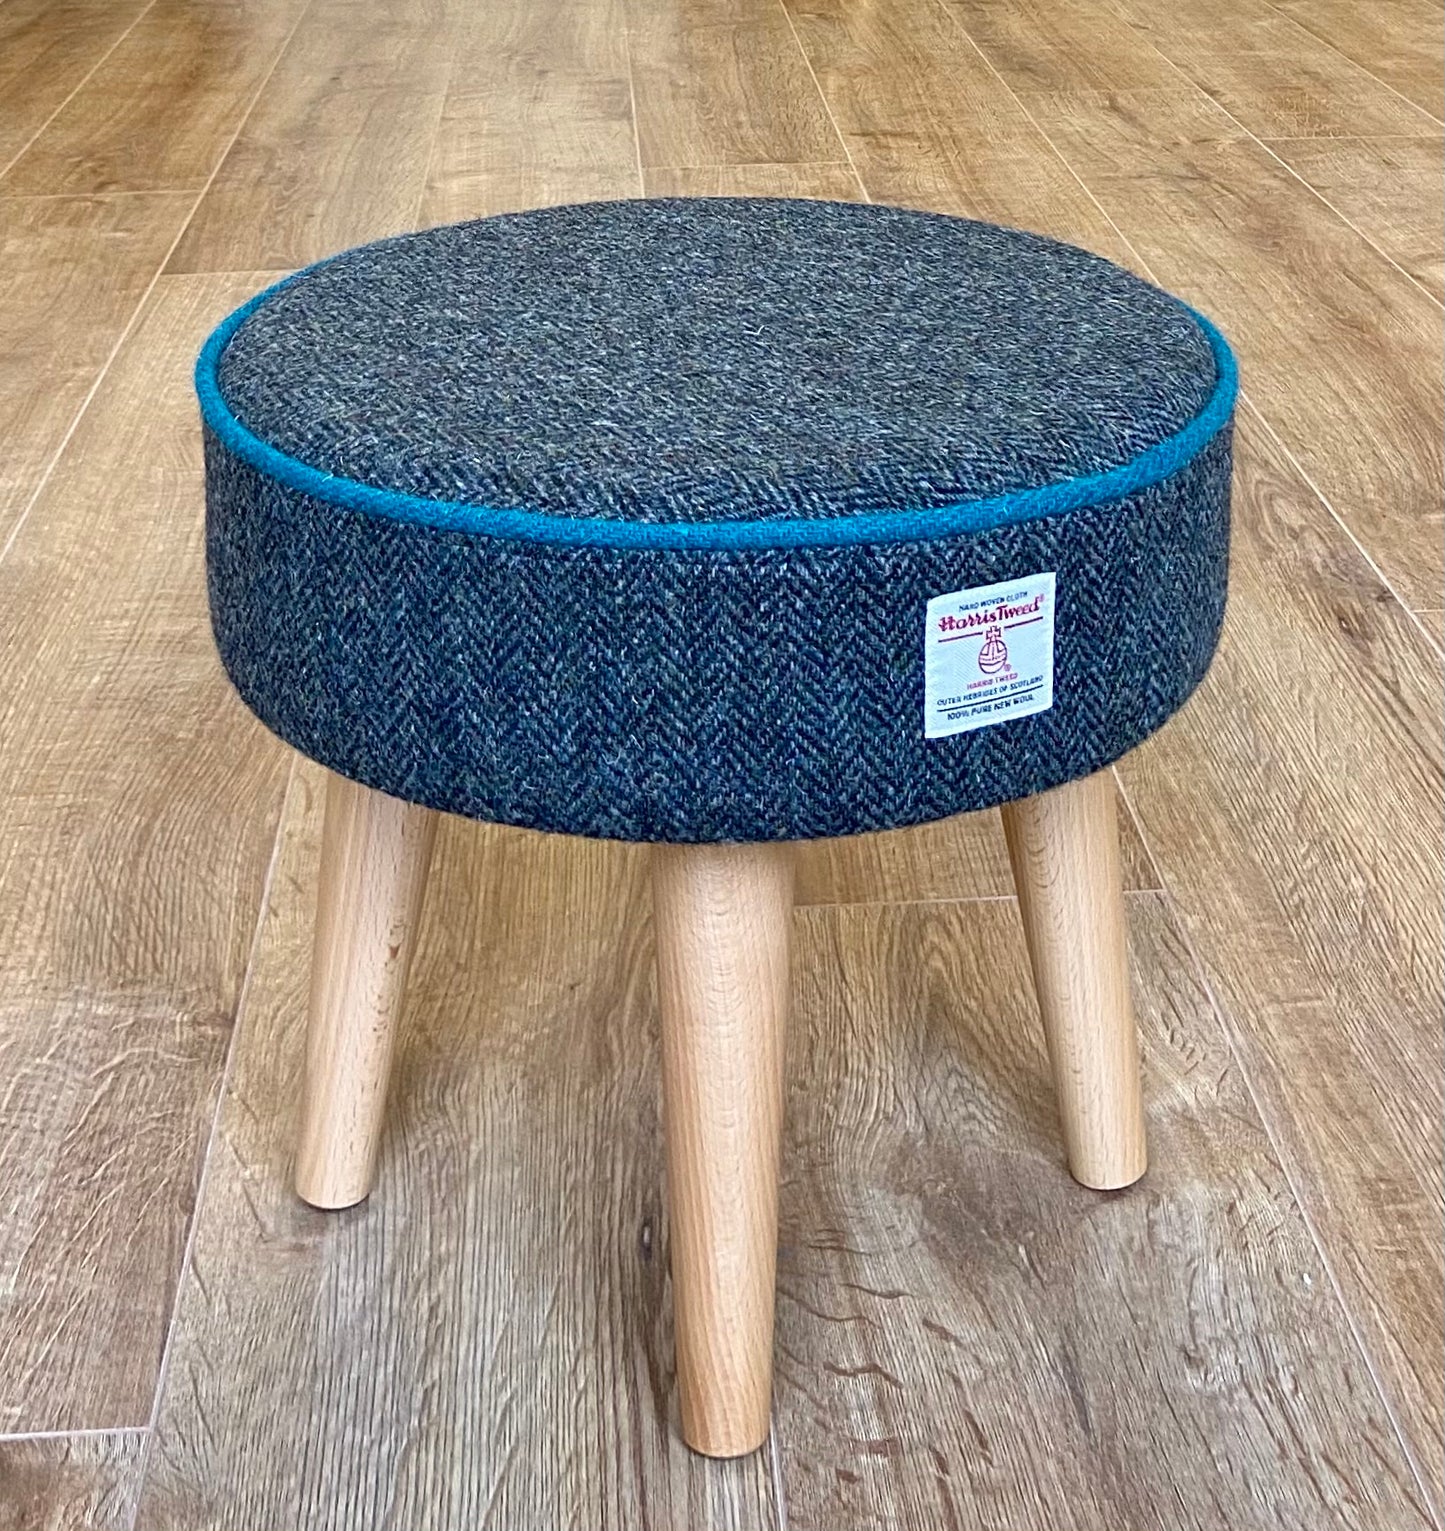 Charcoal Harris Tweed Footstool with Teal Piping and Varnished Wooden Legs